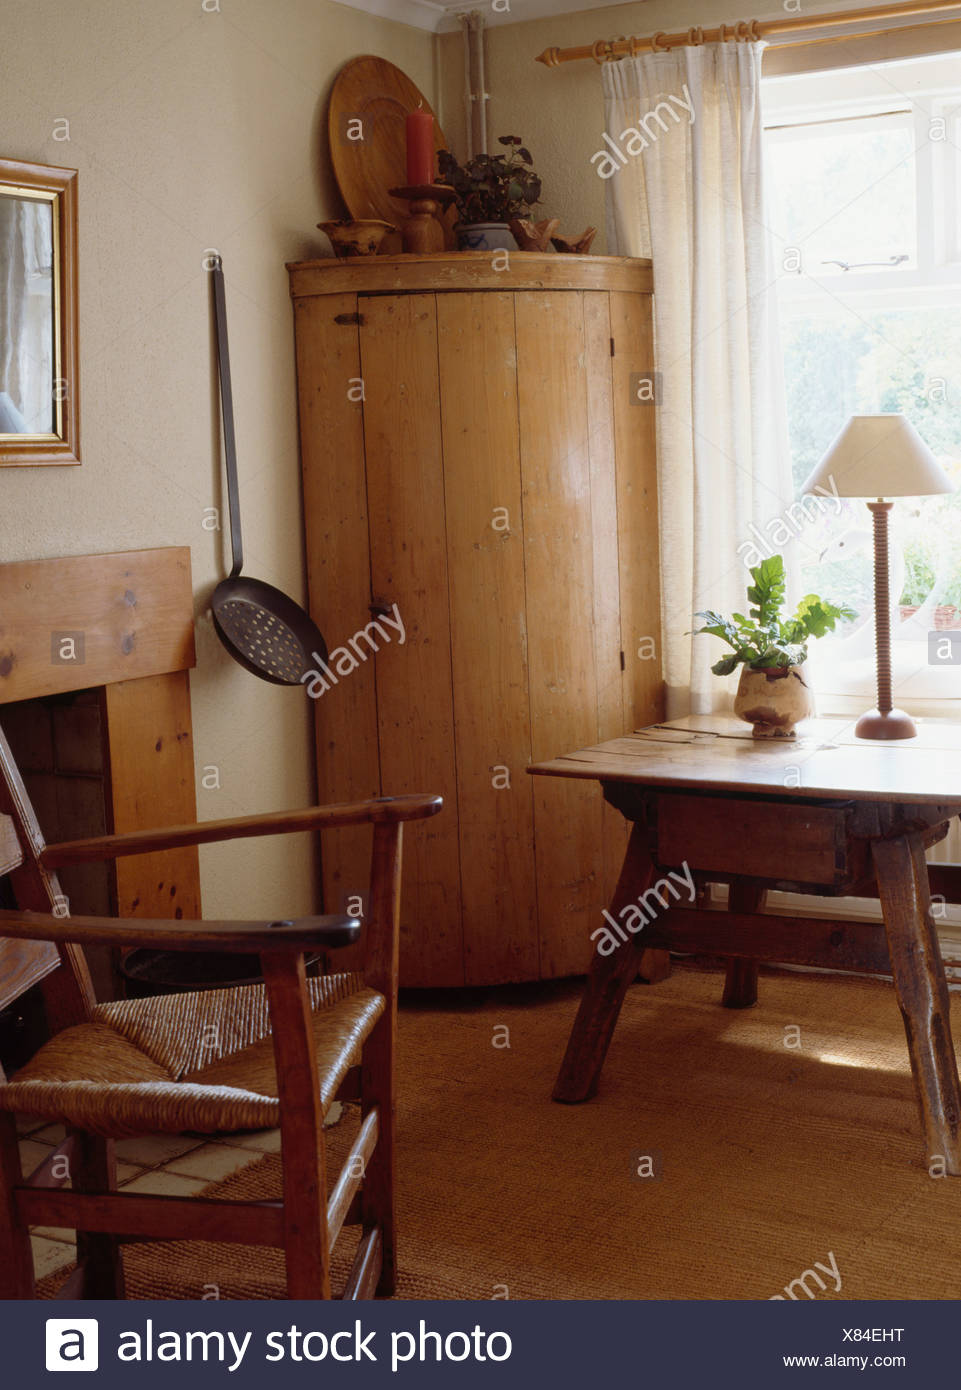 Curved Antique Pine Corner Cupboard In Shaker Style Dining Room